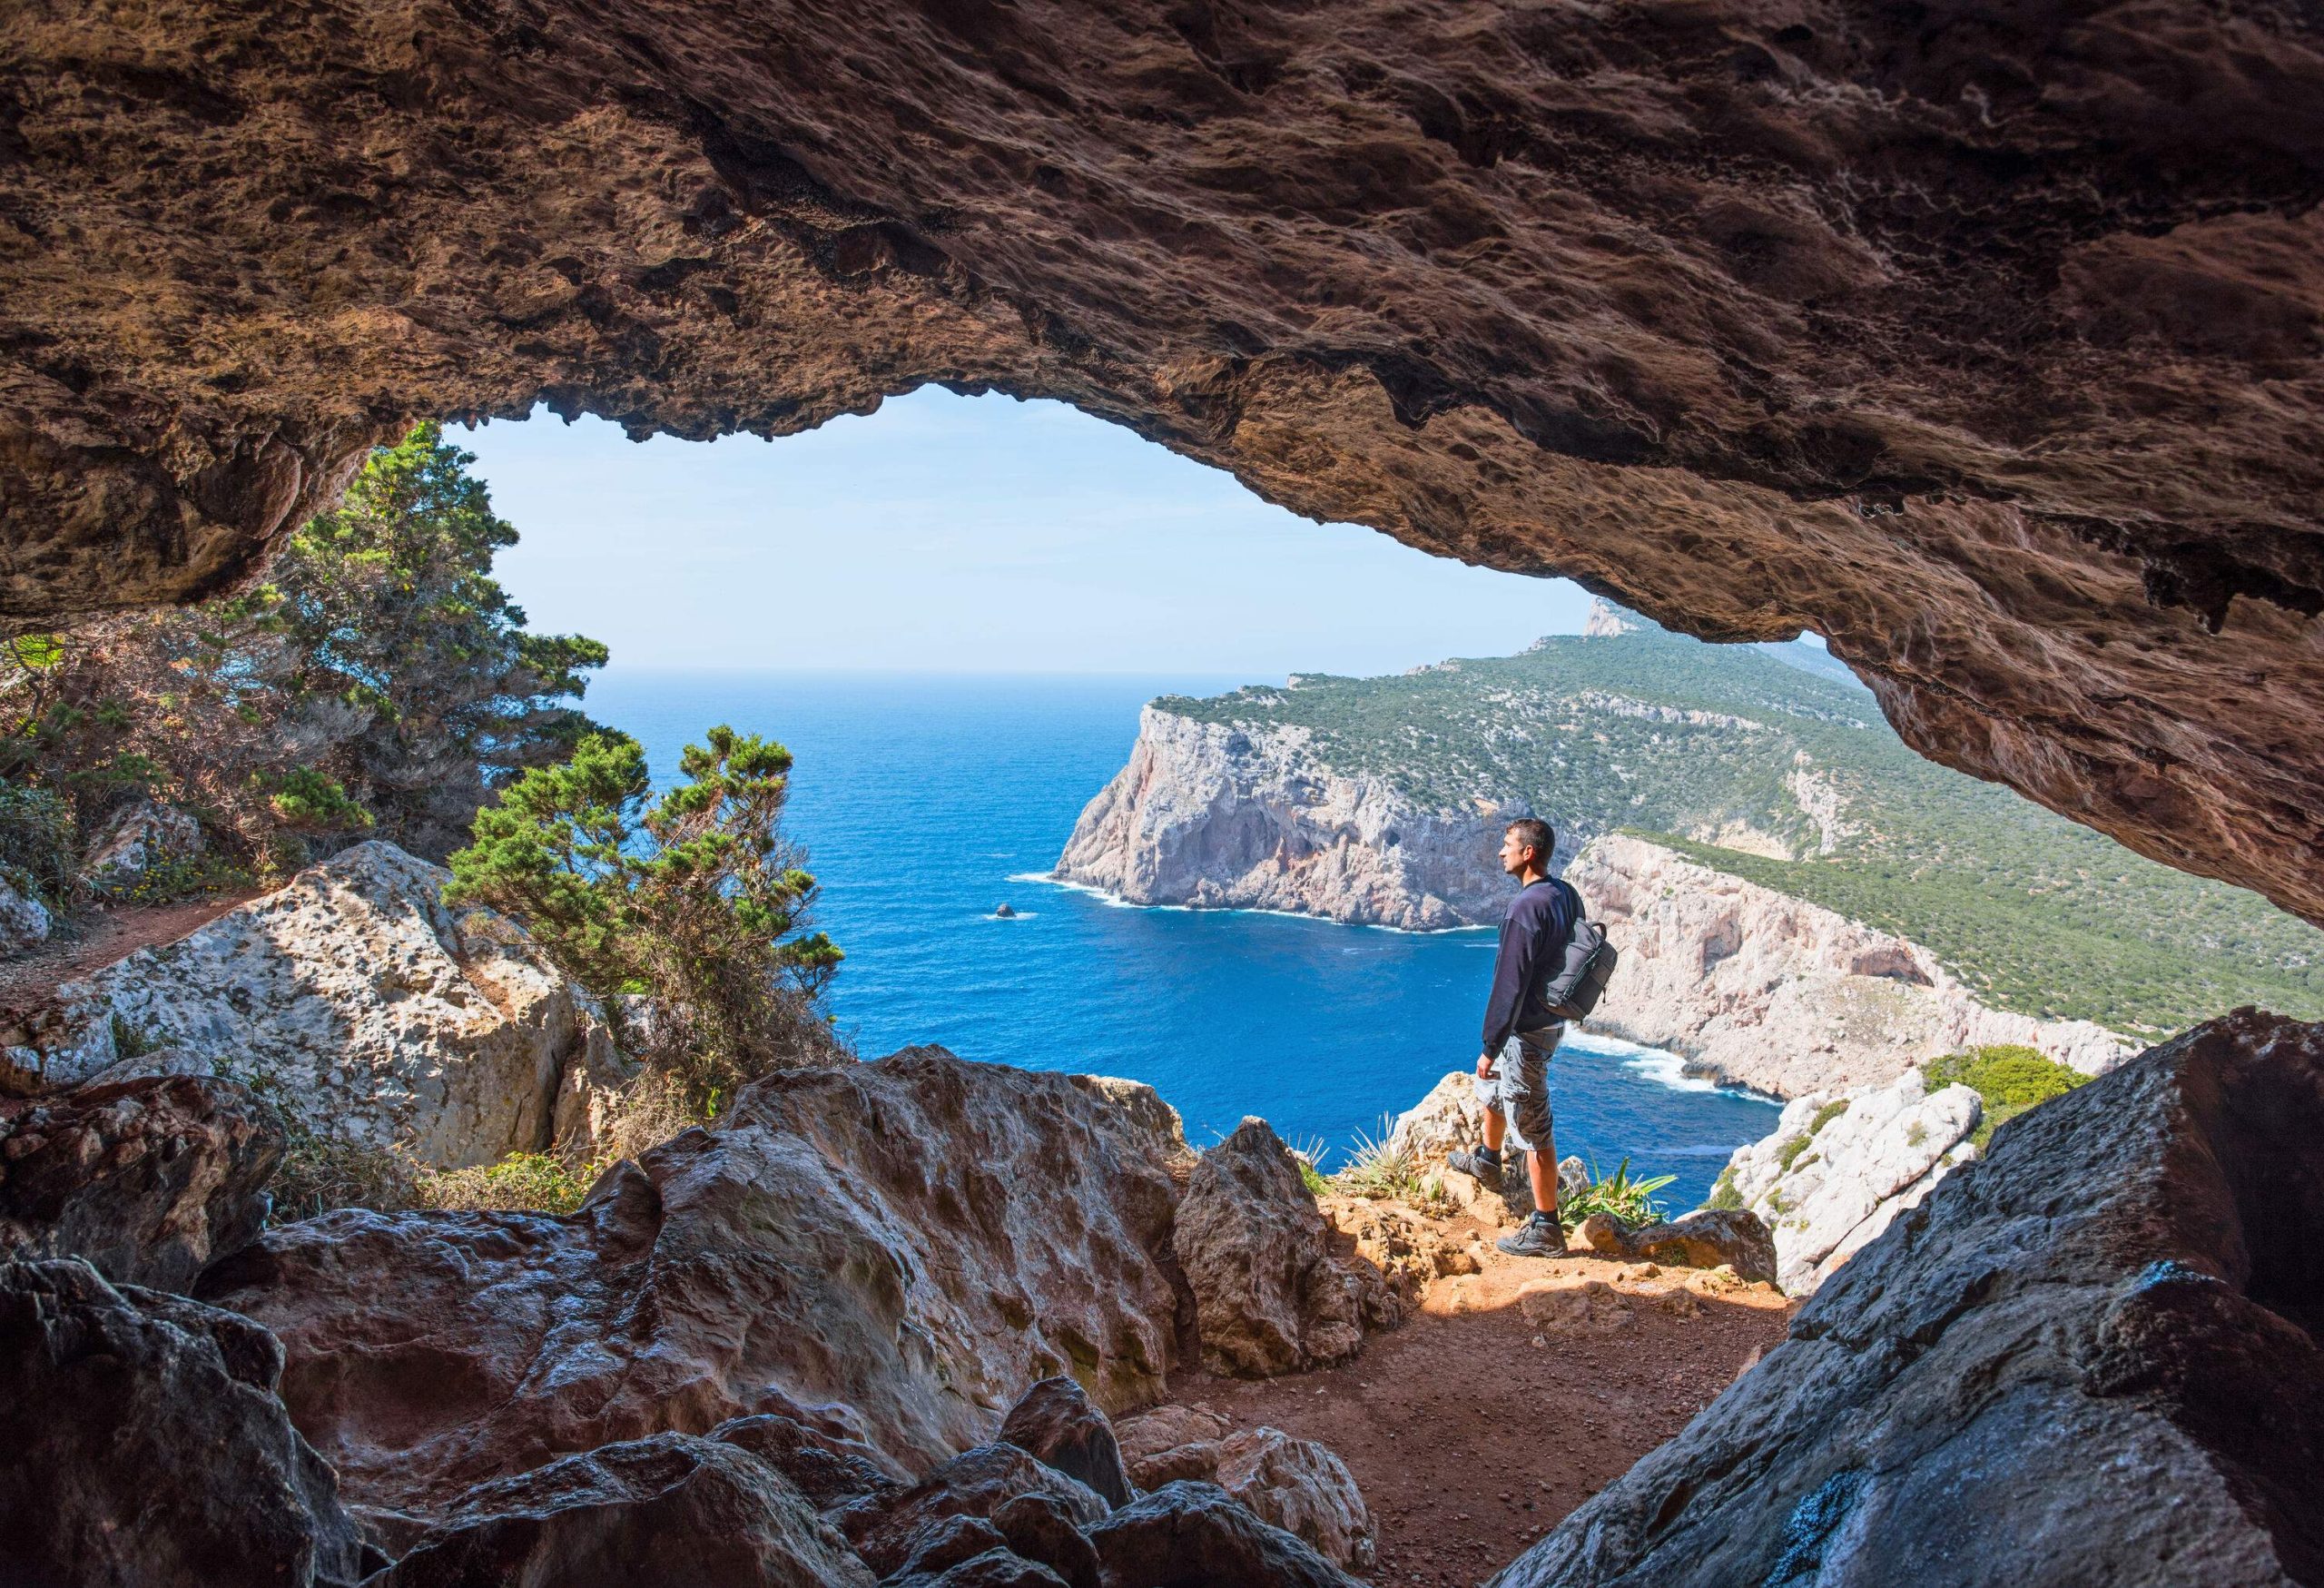 A male hiker standing along the edge outside of a cave overlooking the blue sea.